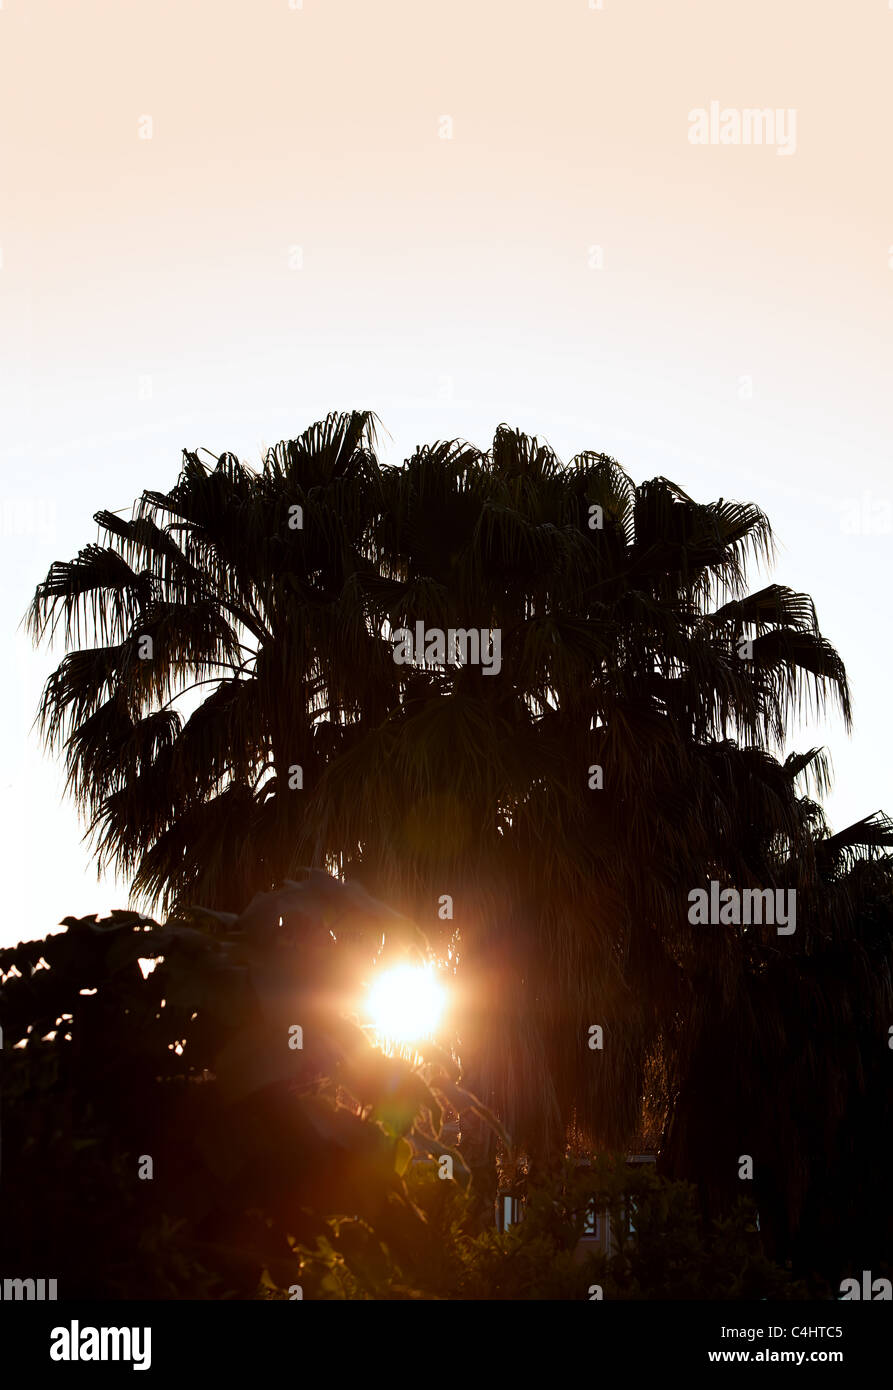 Palm tree silhouette with the shining sun at sunset Stock Photo